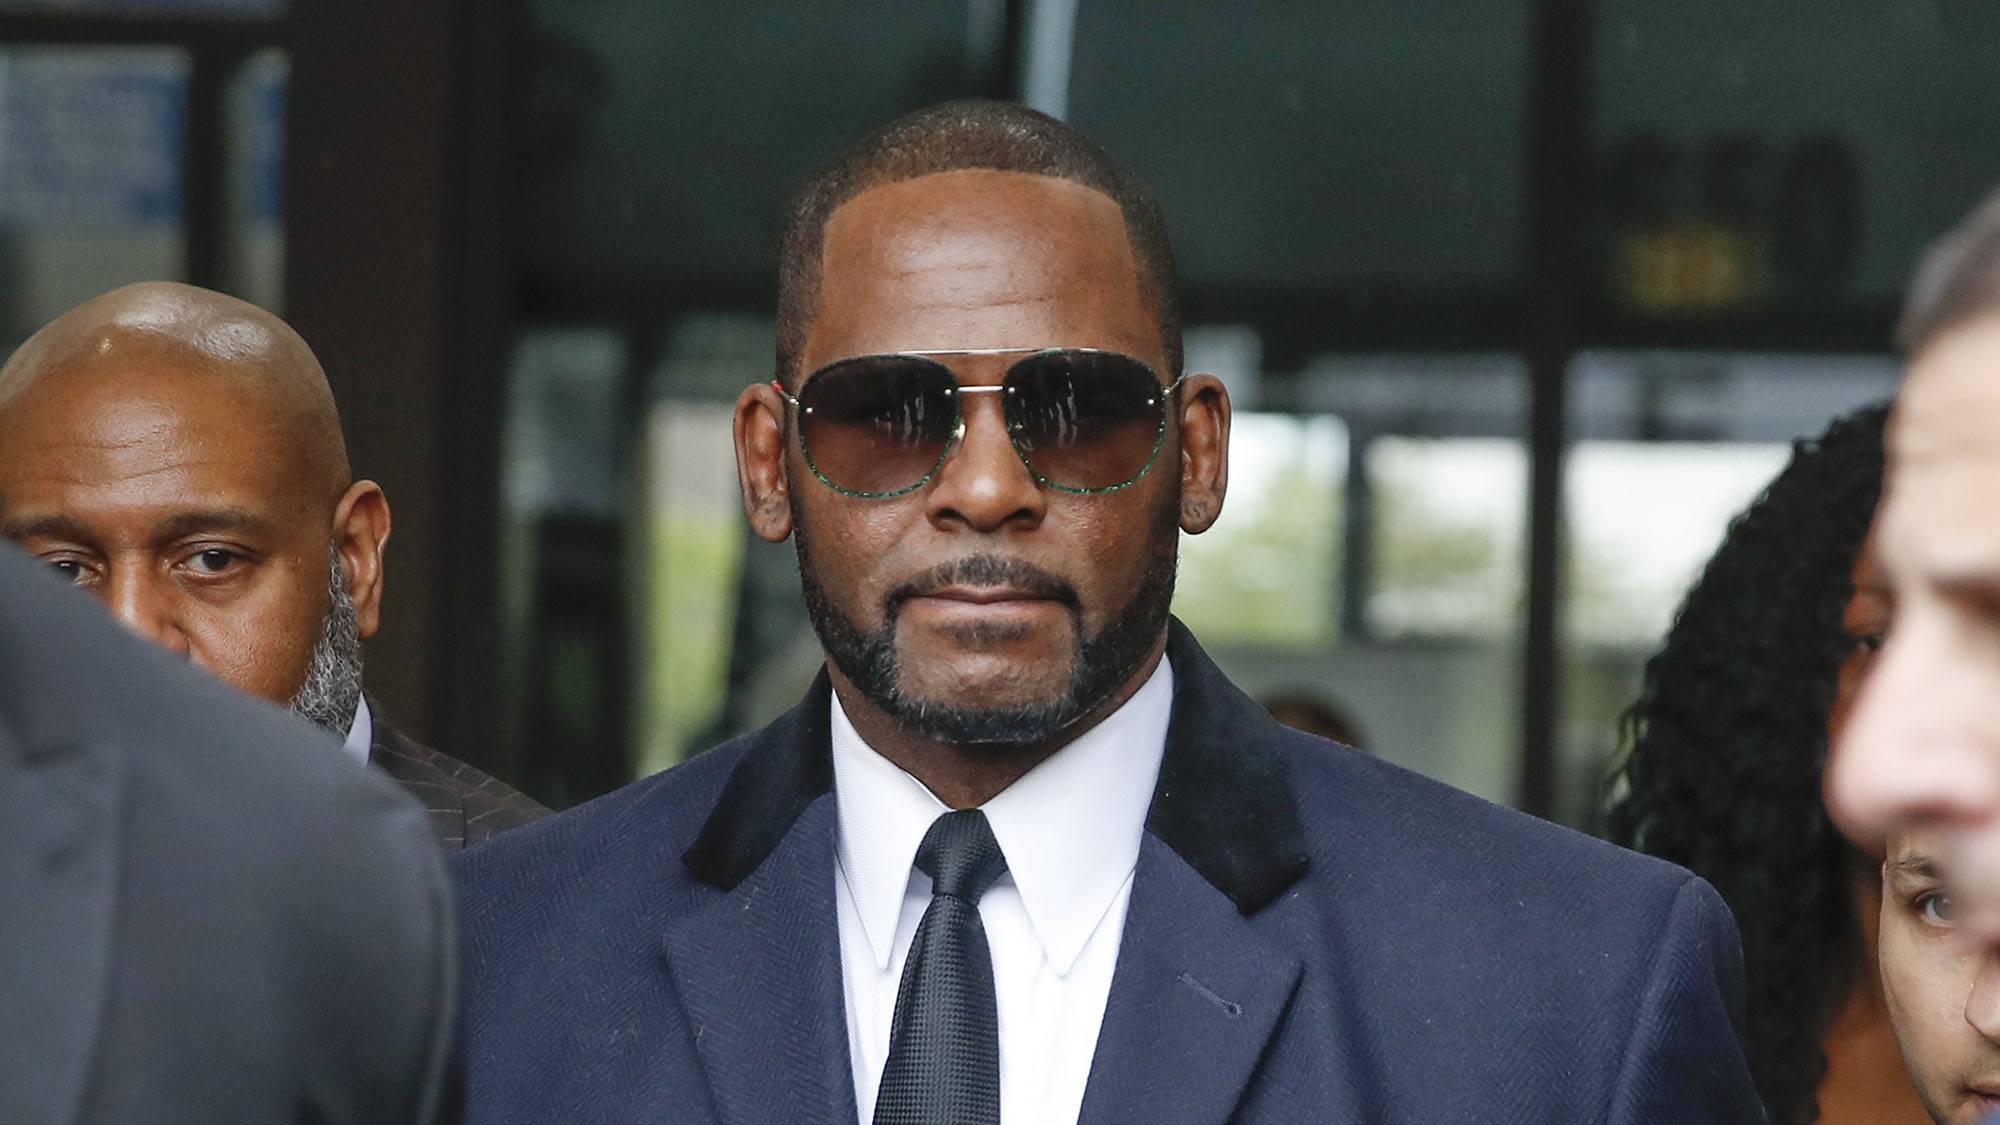 12xxx Cideo - Girl In Sex Videos Allegedly Recorded By R. Kelly Expected To Testify |  News | BET